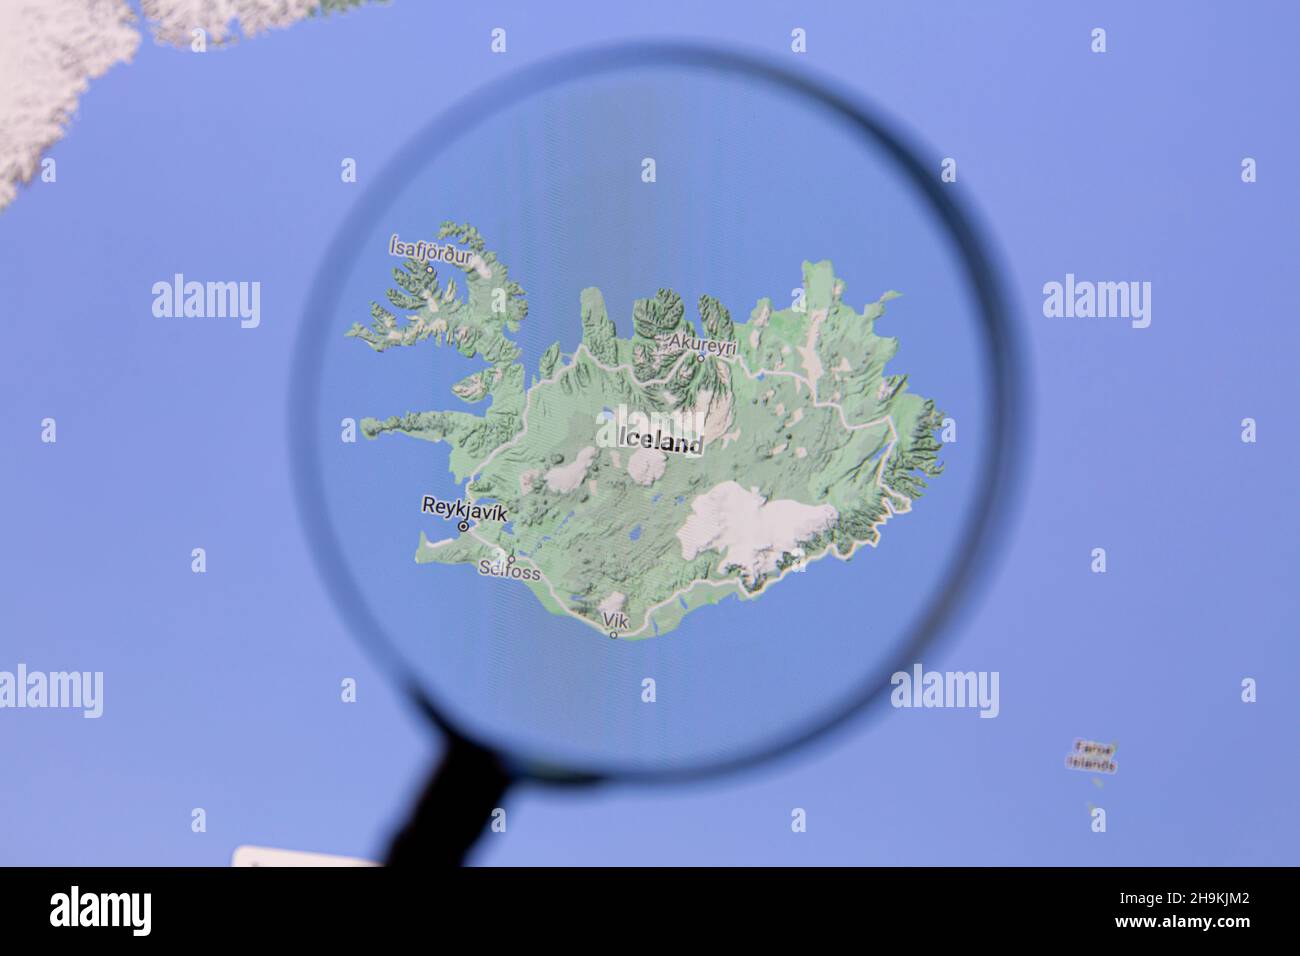 Ostersund, Sweden - Sep 14, 2021: Iceland on Google Maps under a magnifying glass.. Iceland is a Nordic island country in the North Atlantic Ocean. Stock Photo